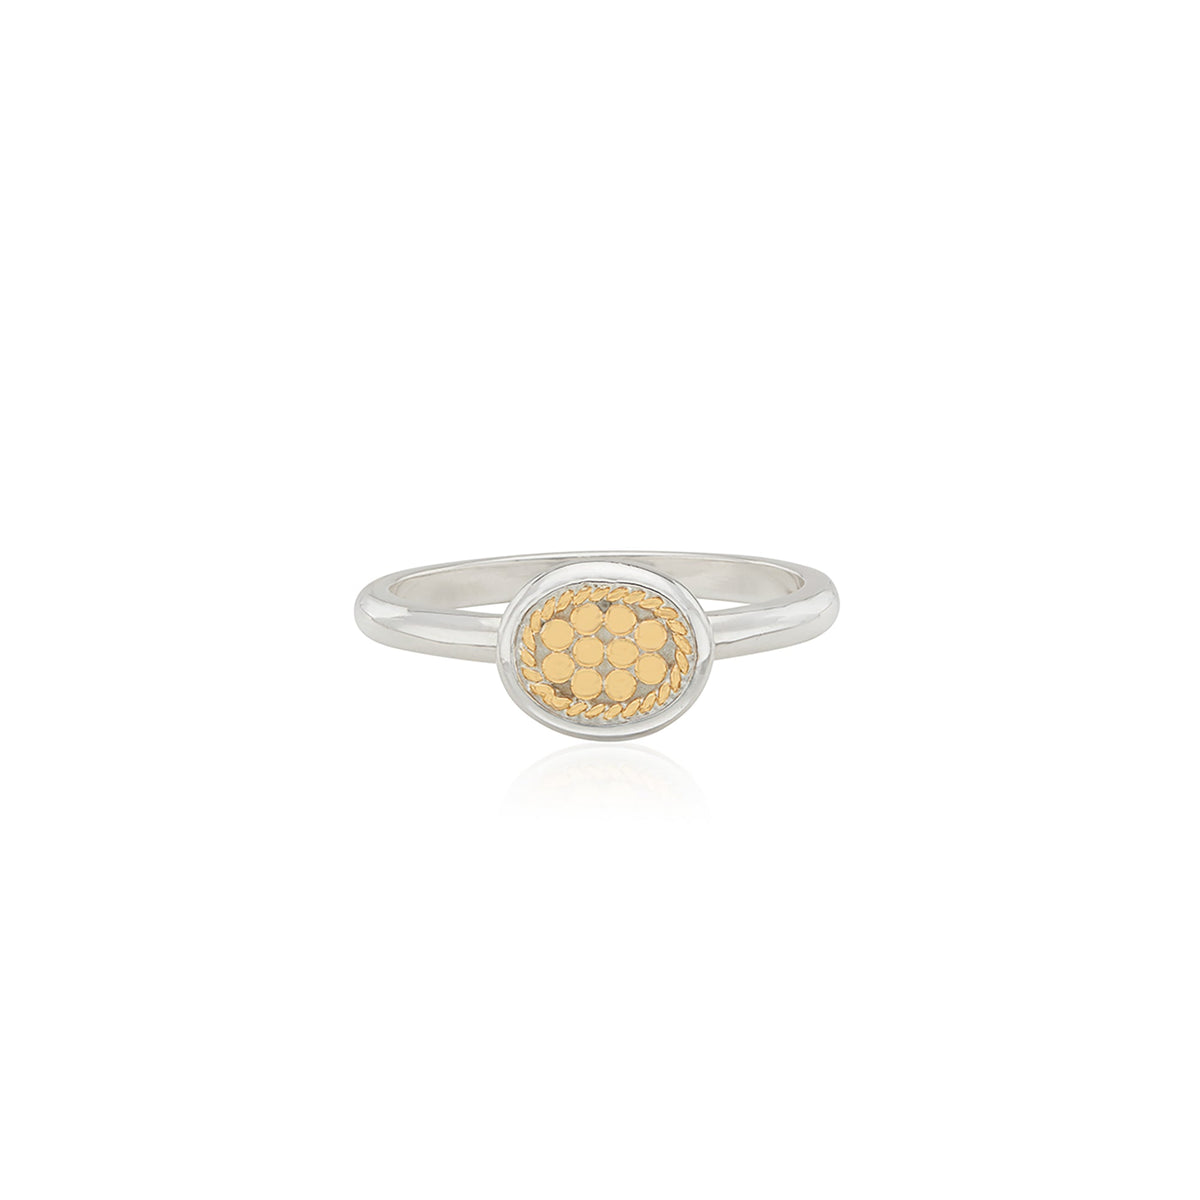 Mixed metal ring with an oval detail at the top